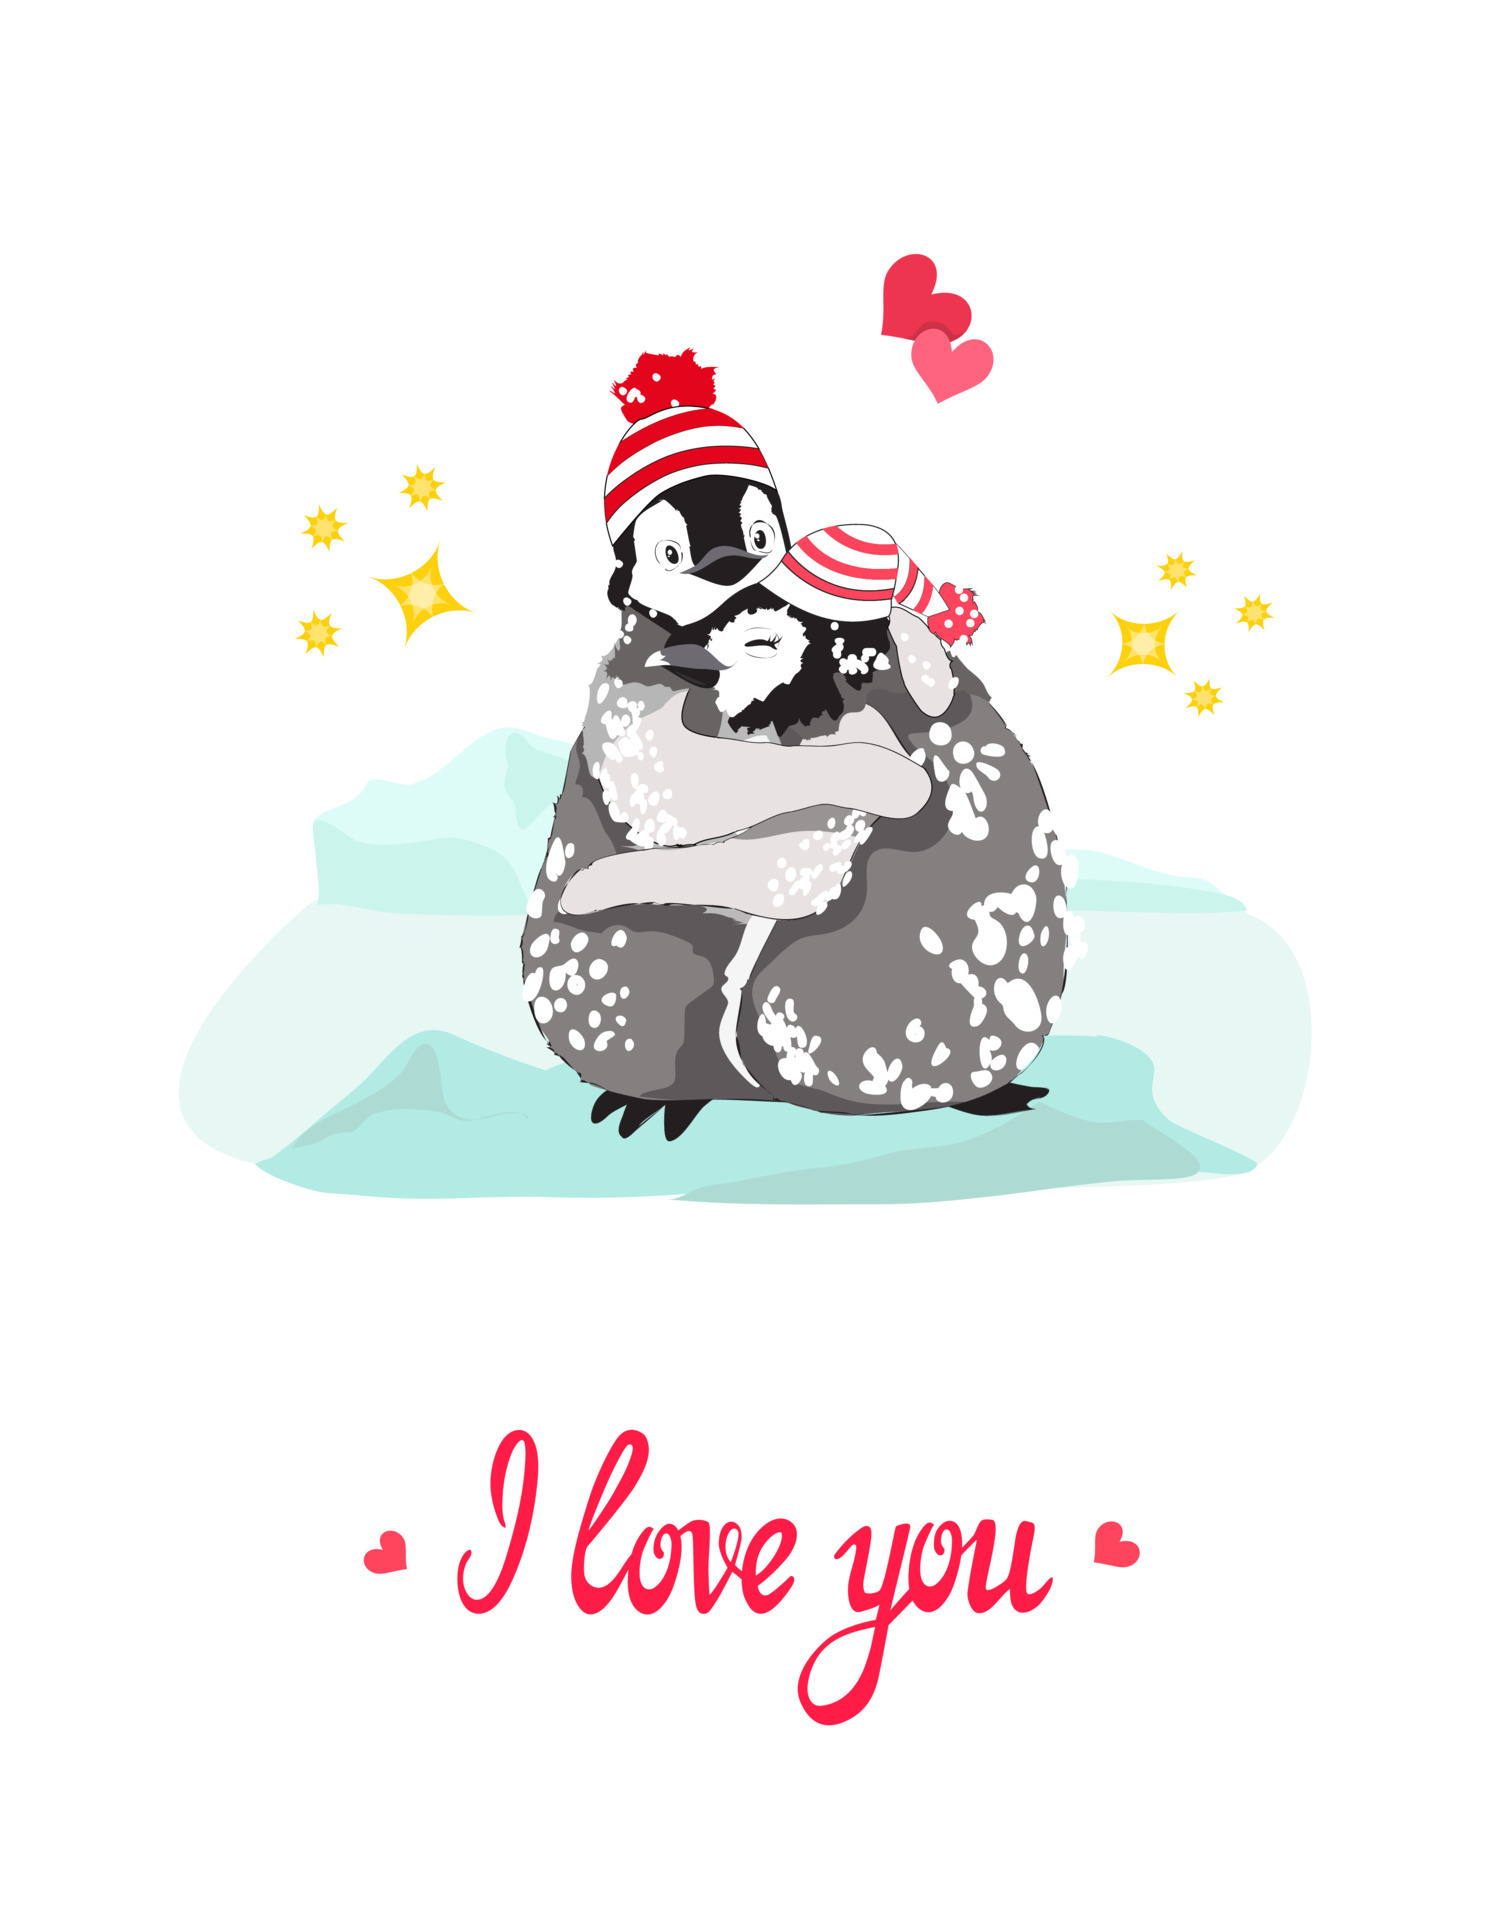 Cute cartoon penguins, boy and girl, in knitted hats, hugging in icy snowy  arctic field, glacier, hearts, stars around, I love you brush lettering.  Valentine, hug day, anniversary greeting card prints 14305432